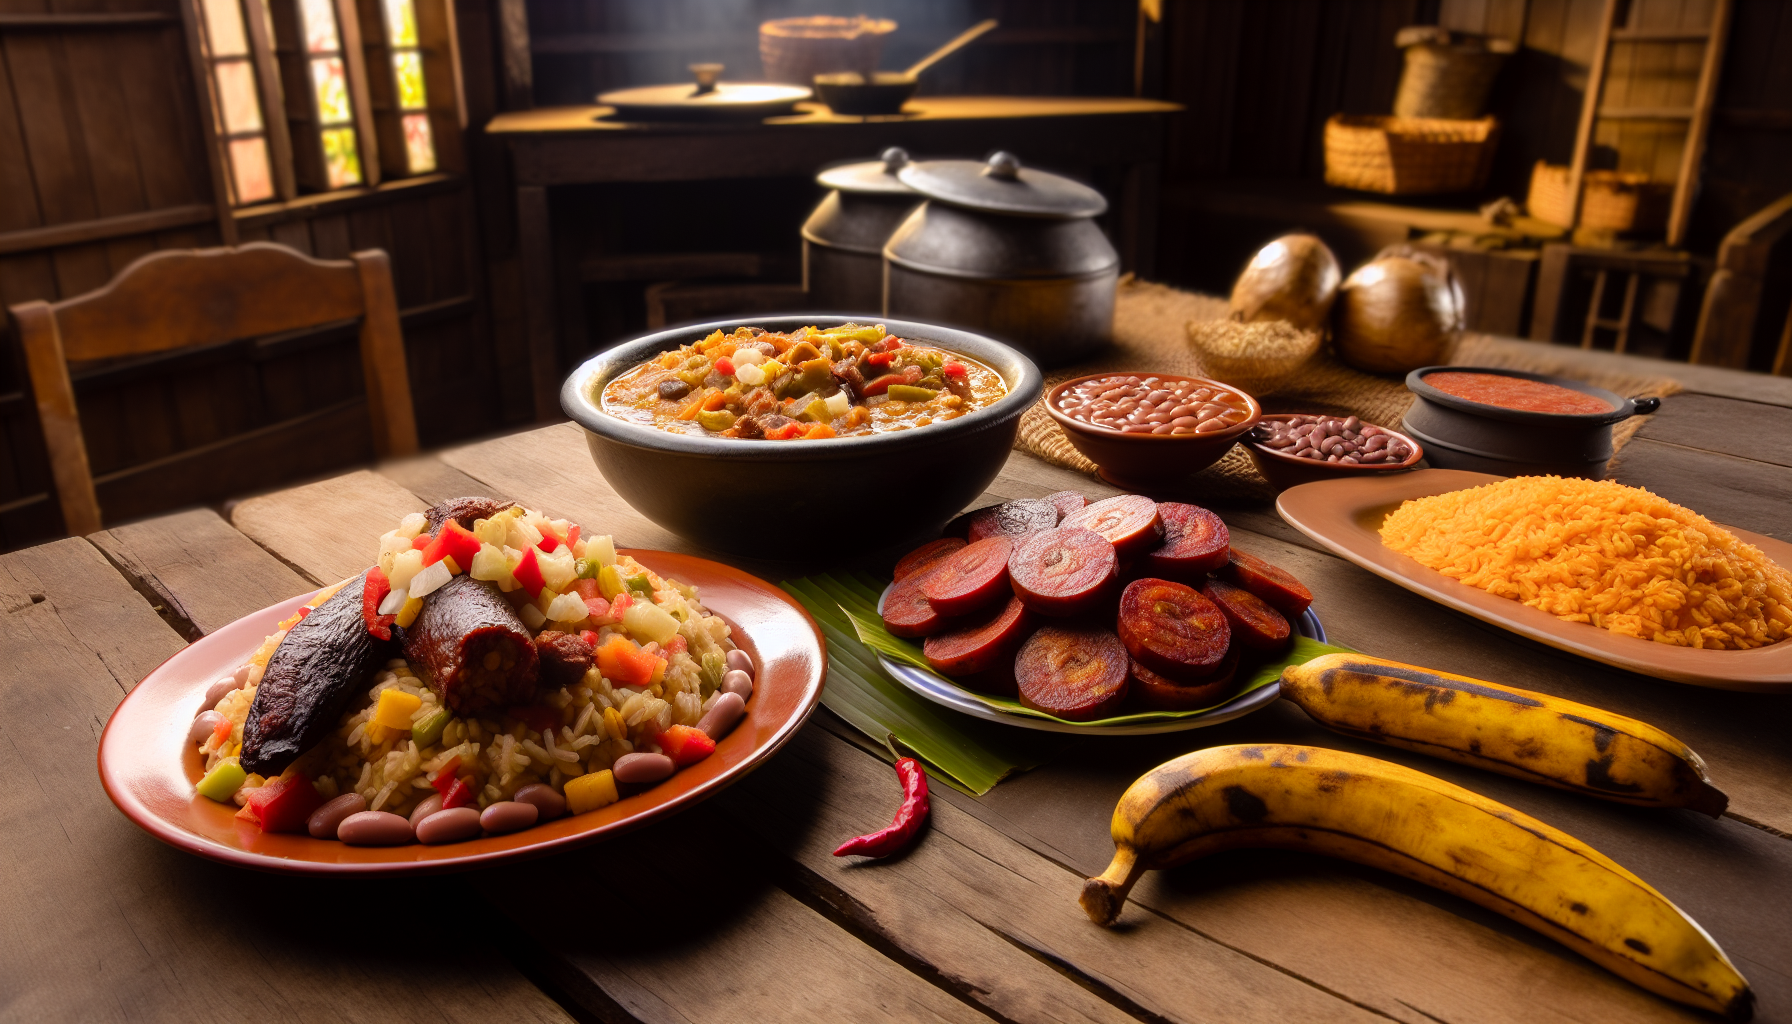 A selection of Costa Rican dishes including Arroz Campesino, beans, plantains, and chorizo